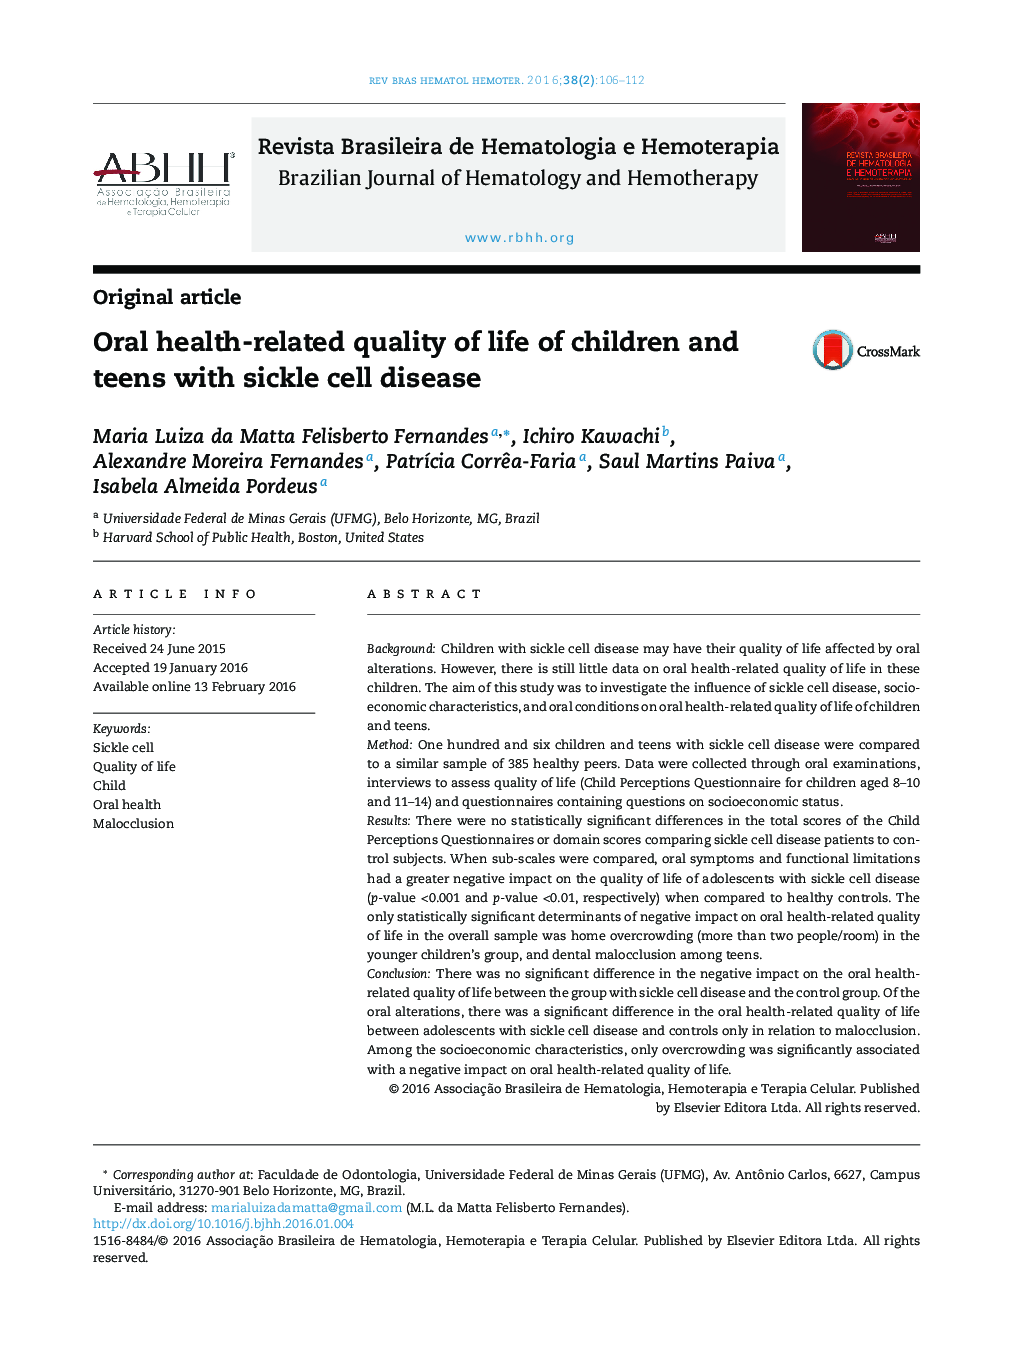 Oral health-related quality of life of children and teens with sickle cell disease